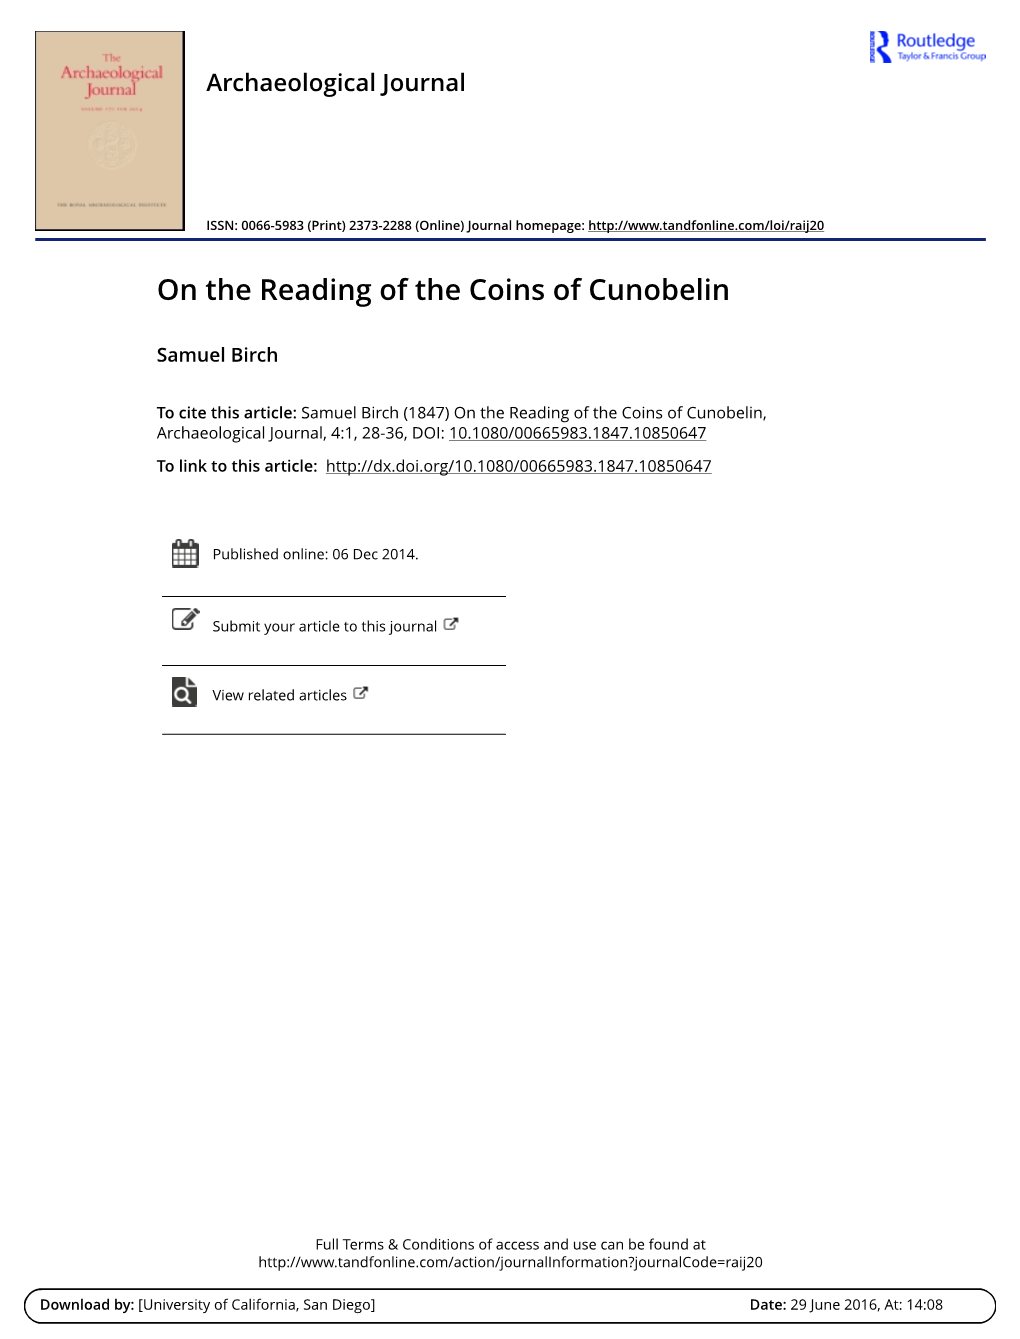 On the Reading of the Coins of Cunobelin